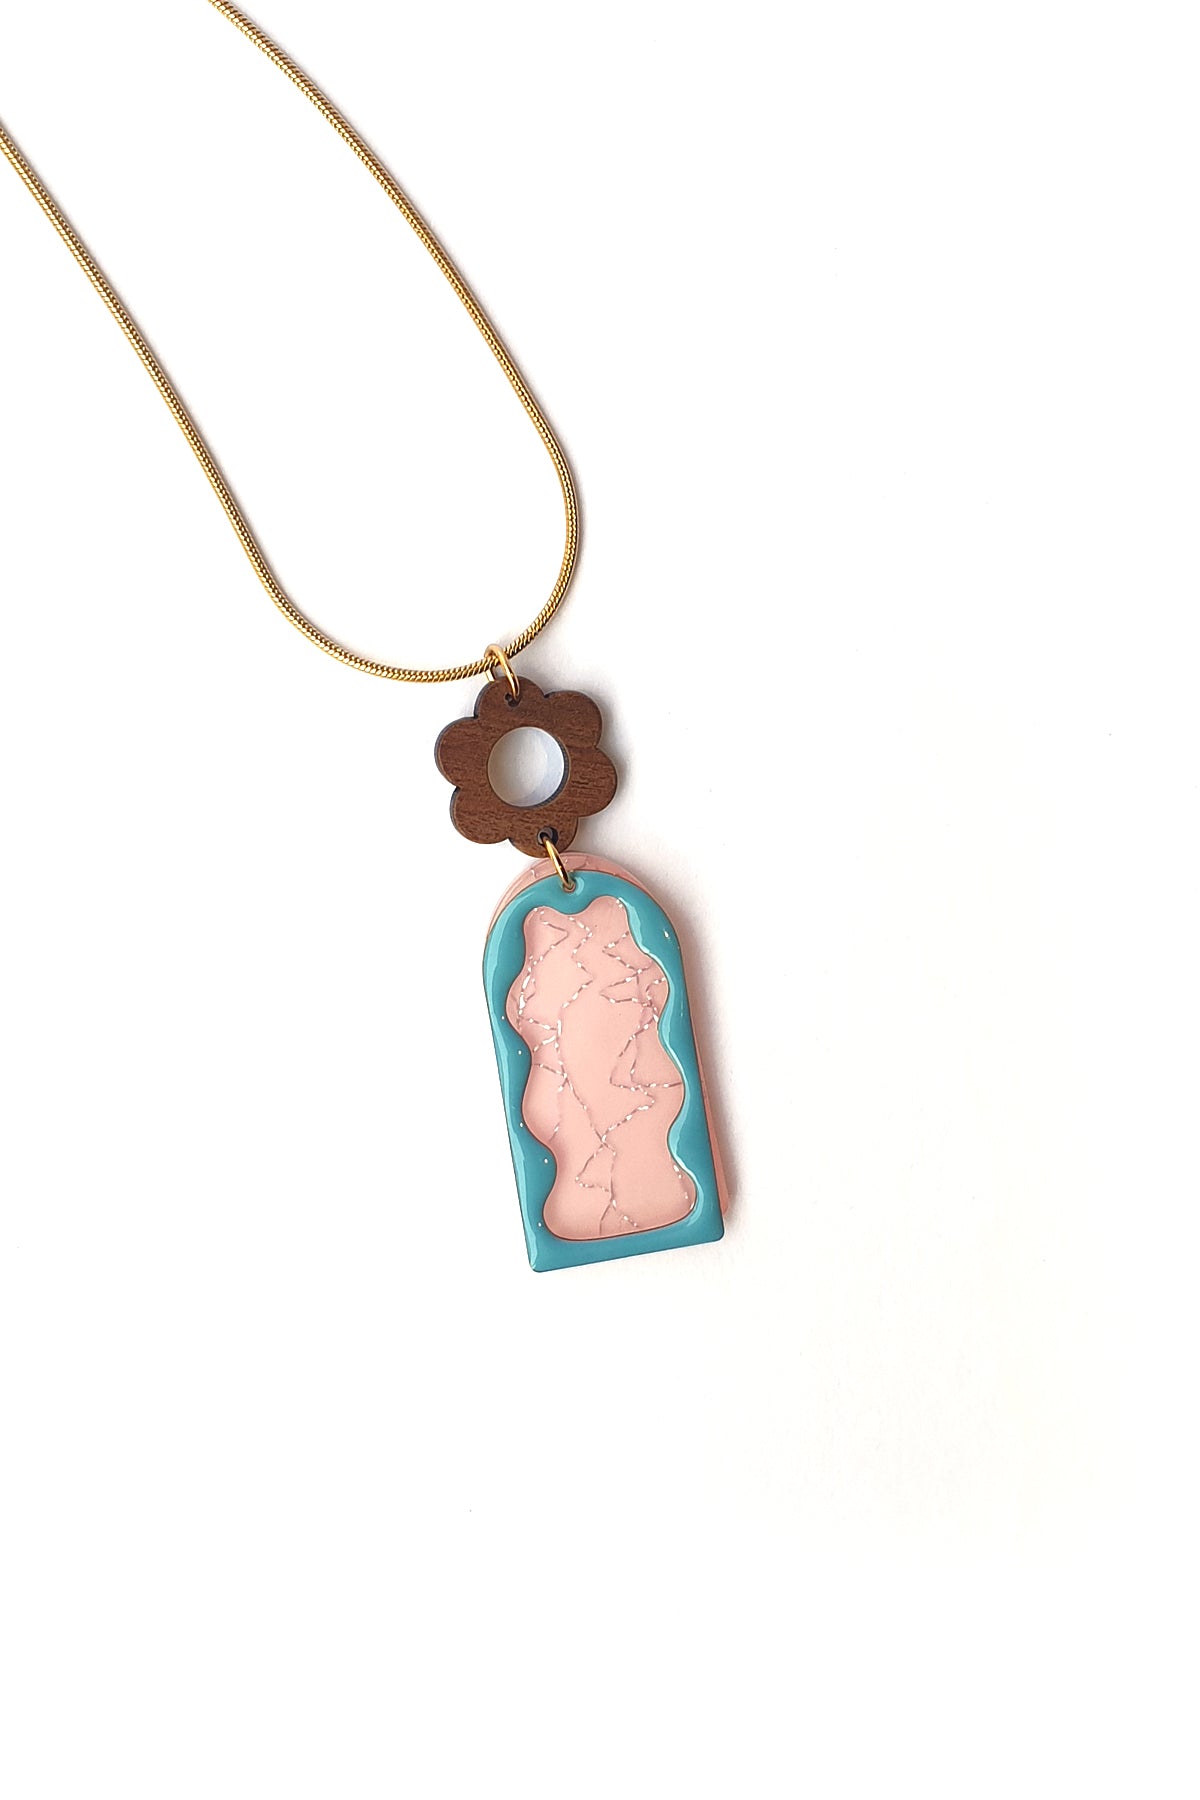 A necklace lays against a white background. It features a gold chain, a wooden flower top, followed by a pink acrylic arch with silver thread detail overlaid by a blue acrylic wavy arch frame.